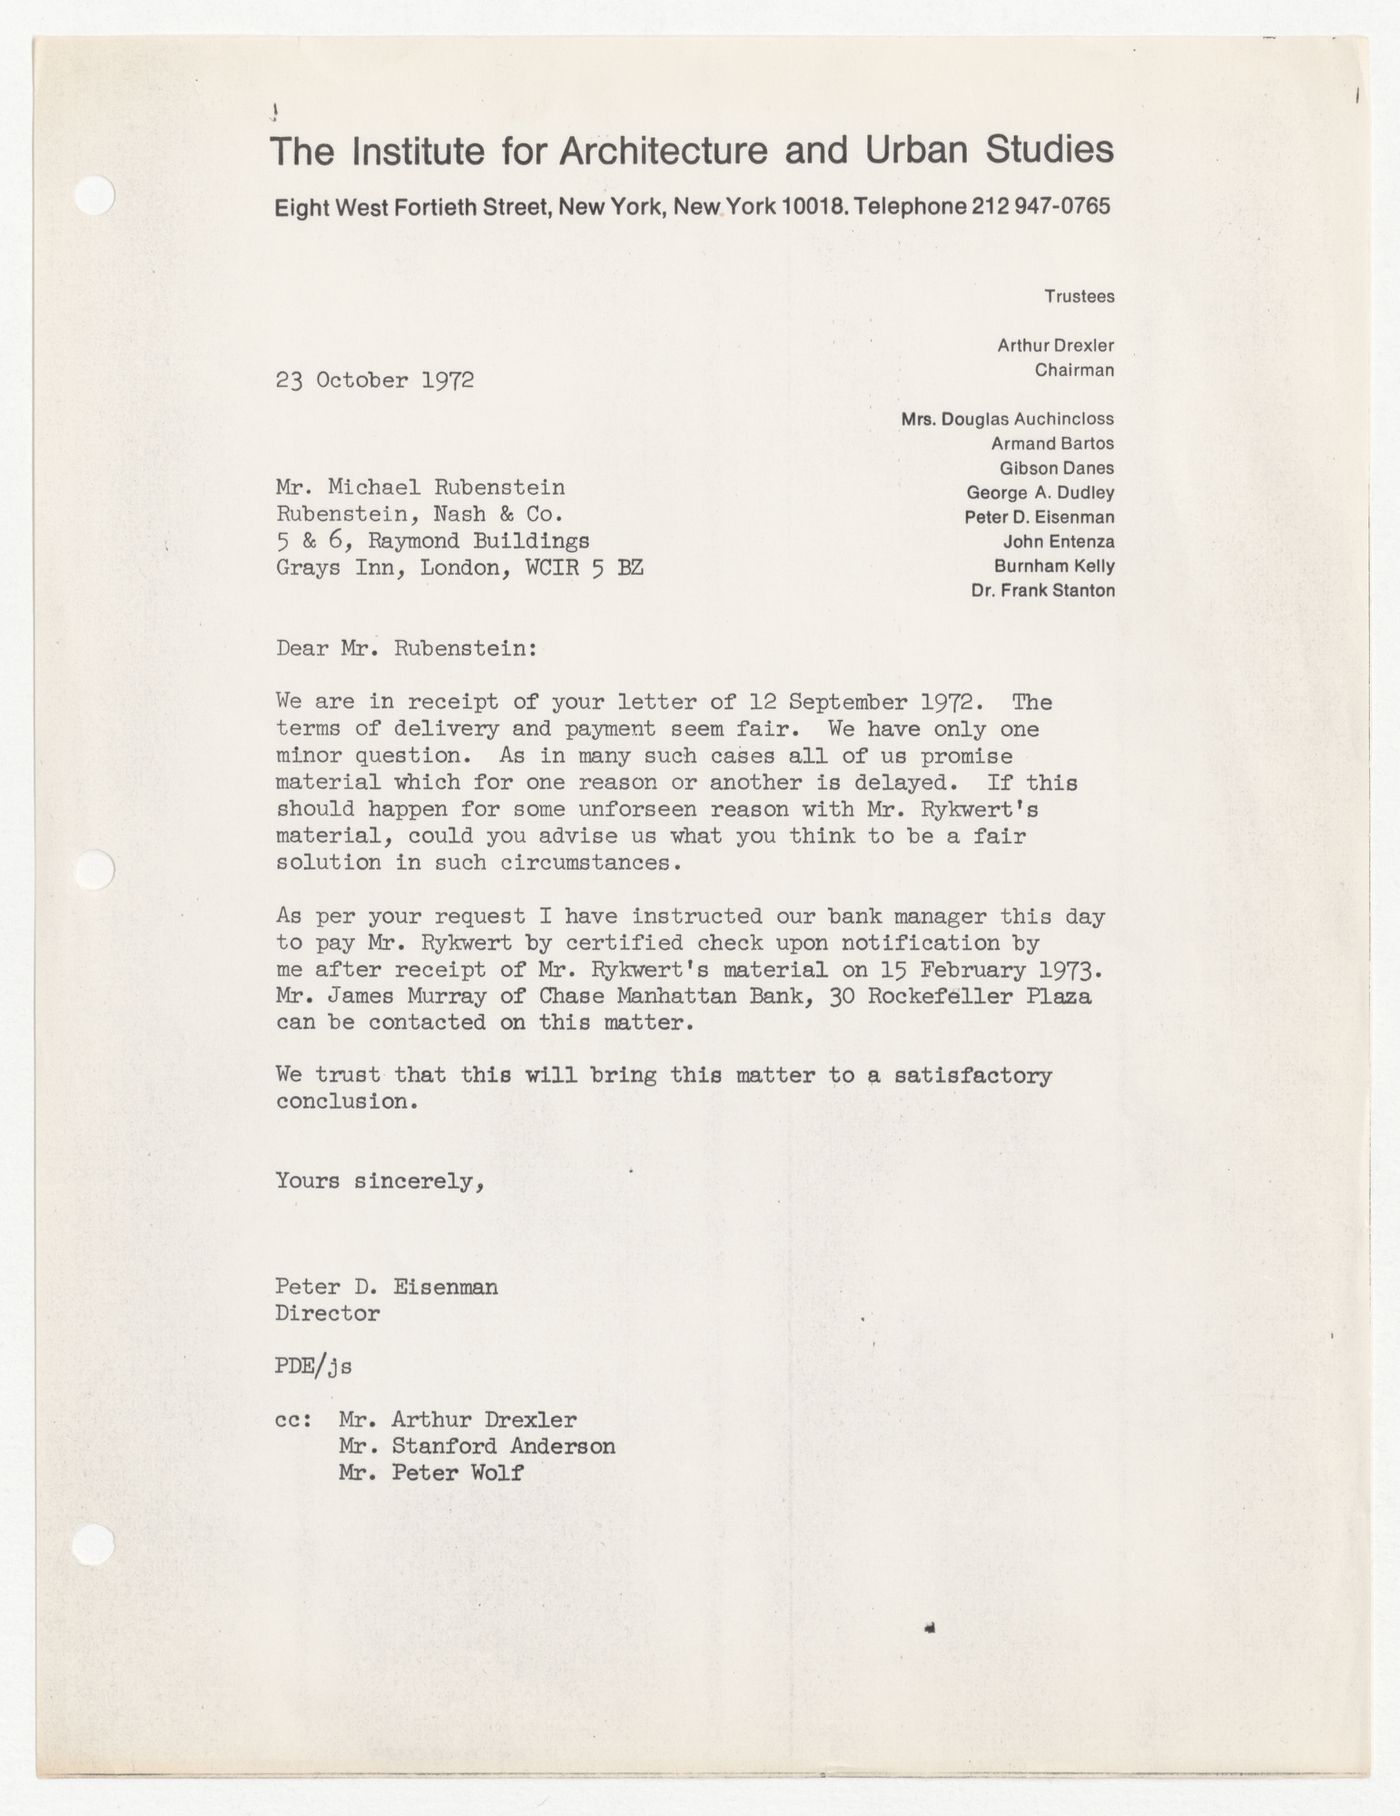 Letter from Peter D. Eisenman to Michael Rubenstein confirming a payment received